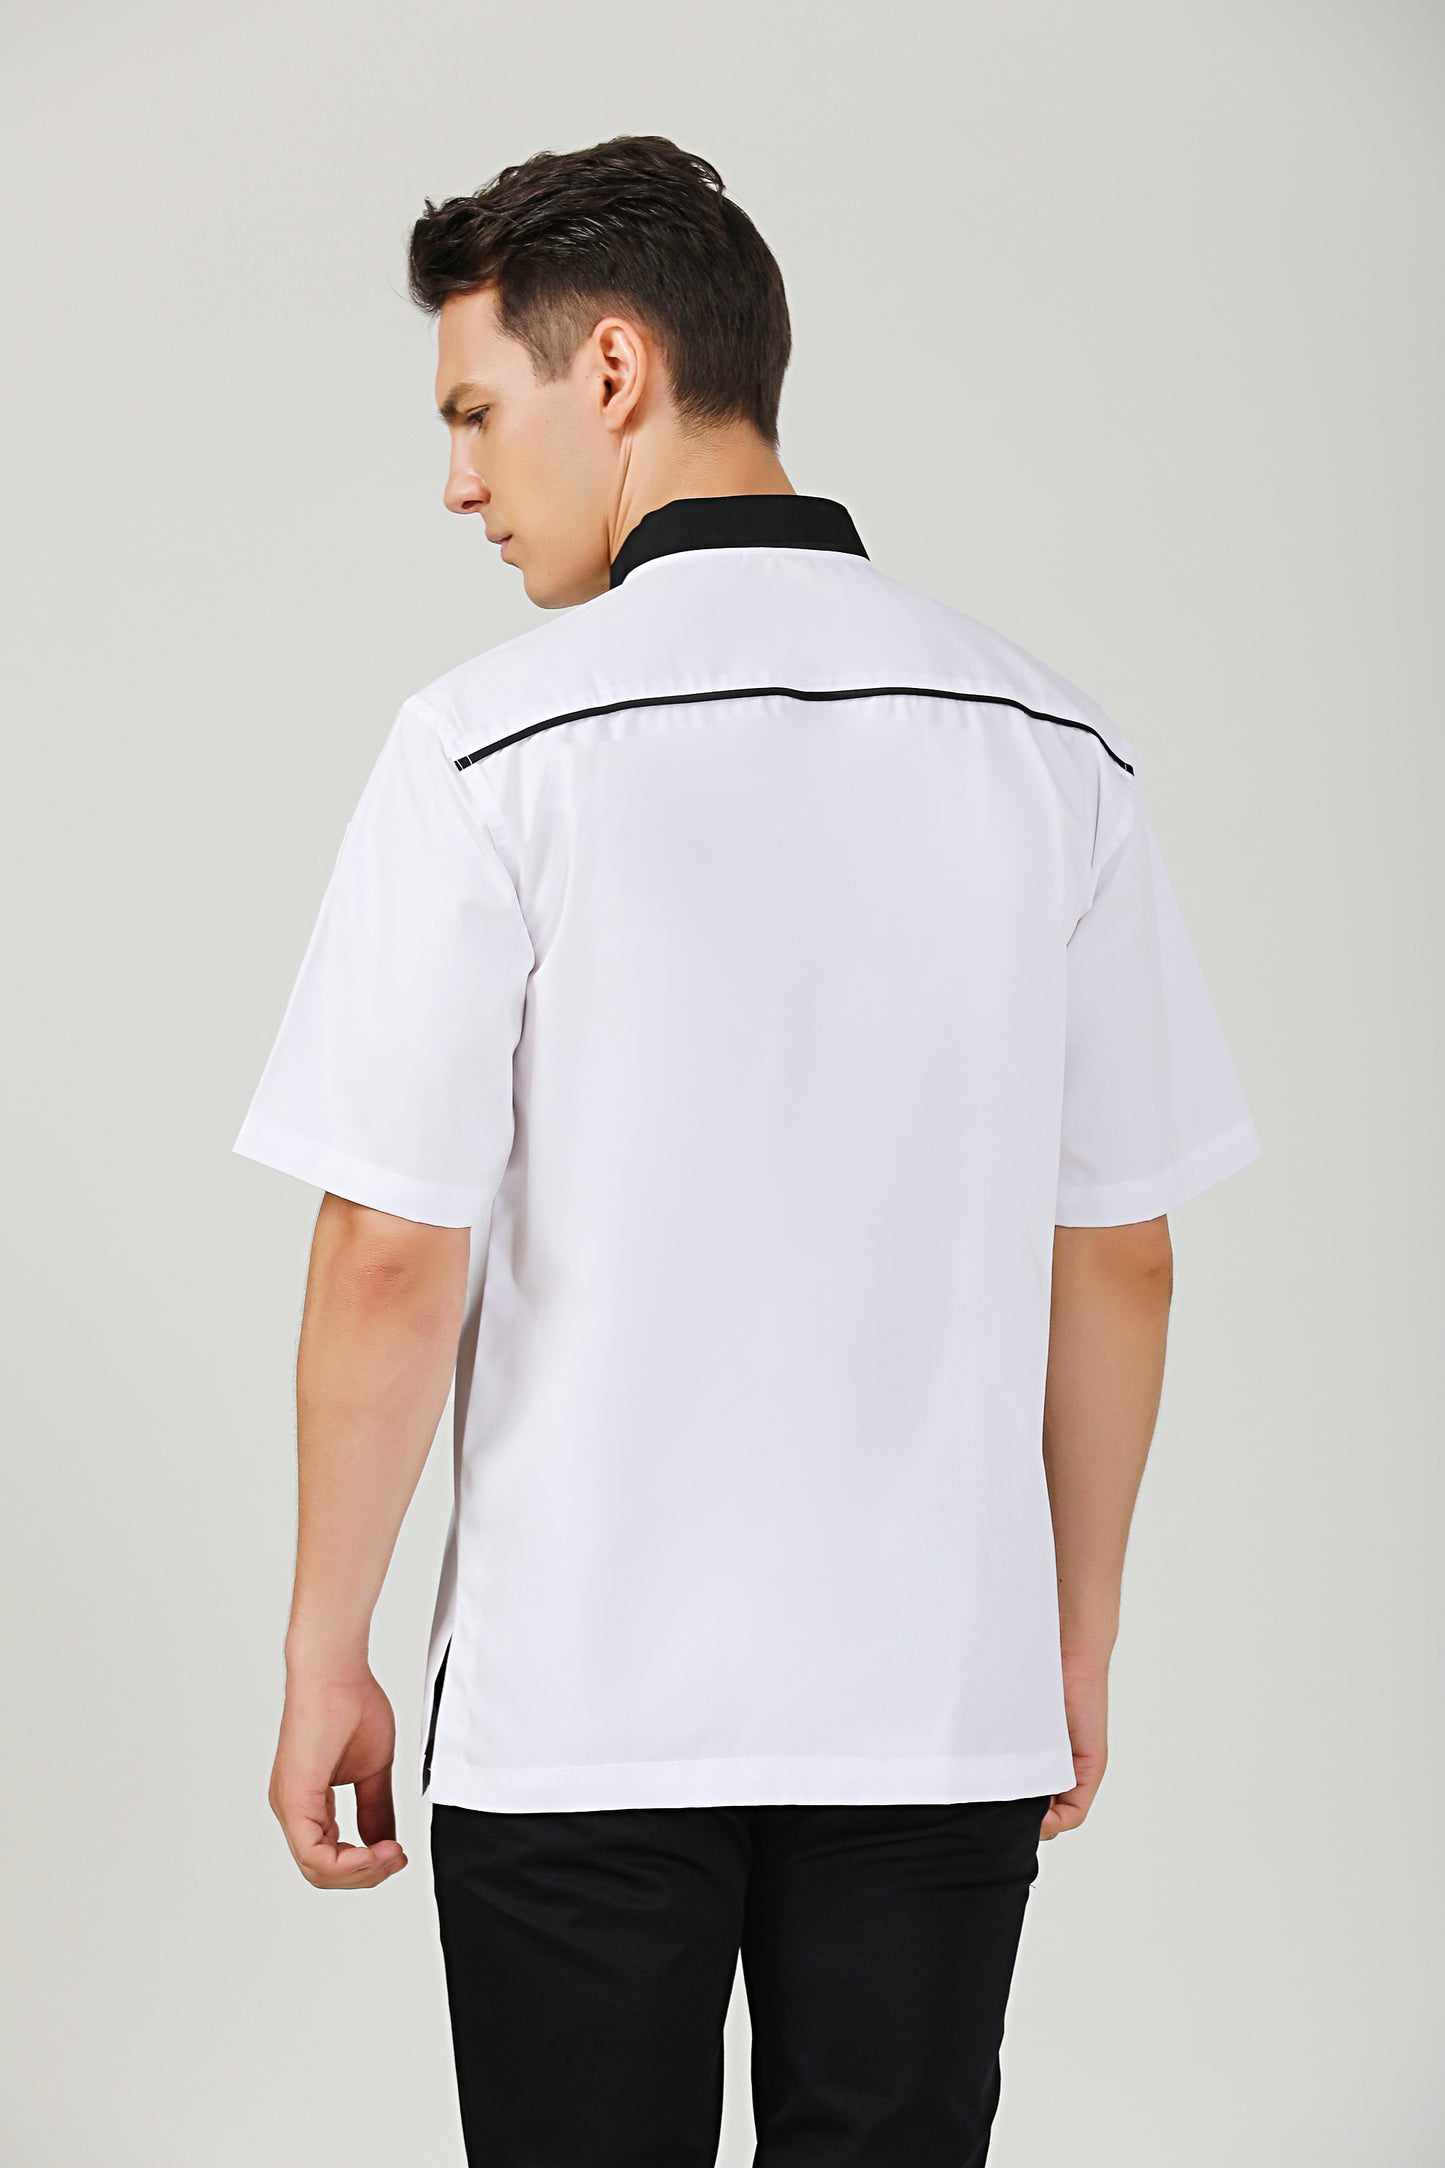 Willow Chef Jacket, Short Sleeve